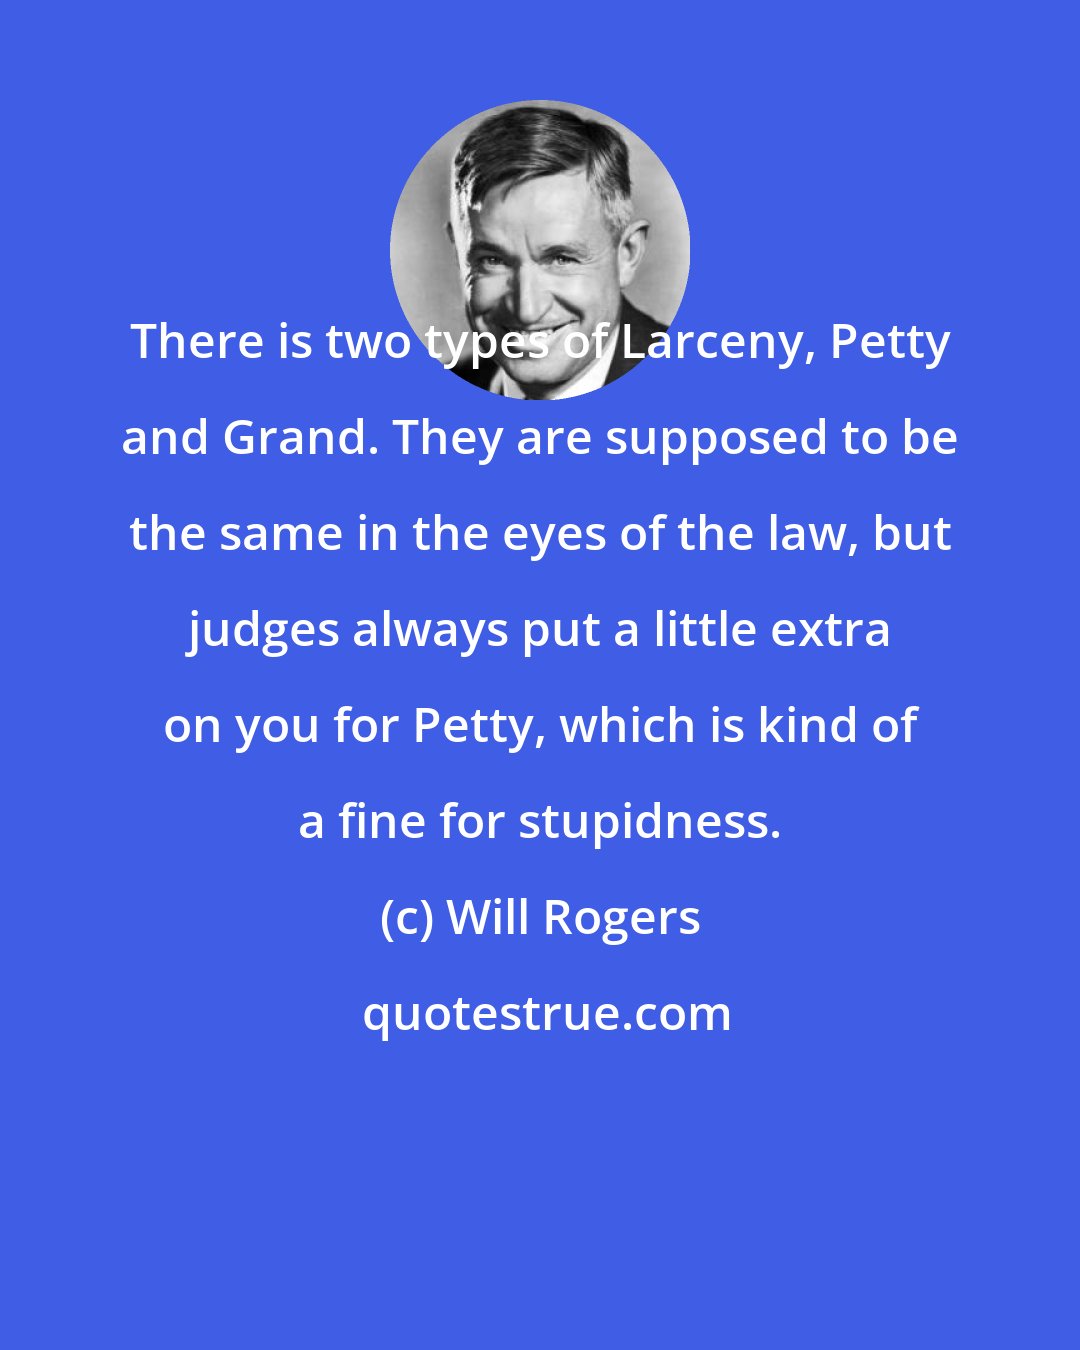 Will Rogers: There is two types of Larceny, Petty and Grand. They are supposed to be the same in the eyes of the law, but judges always put a little extra on you for Petty, which is kind of a fine for stupidness.